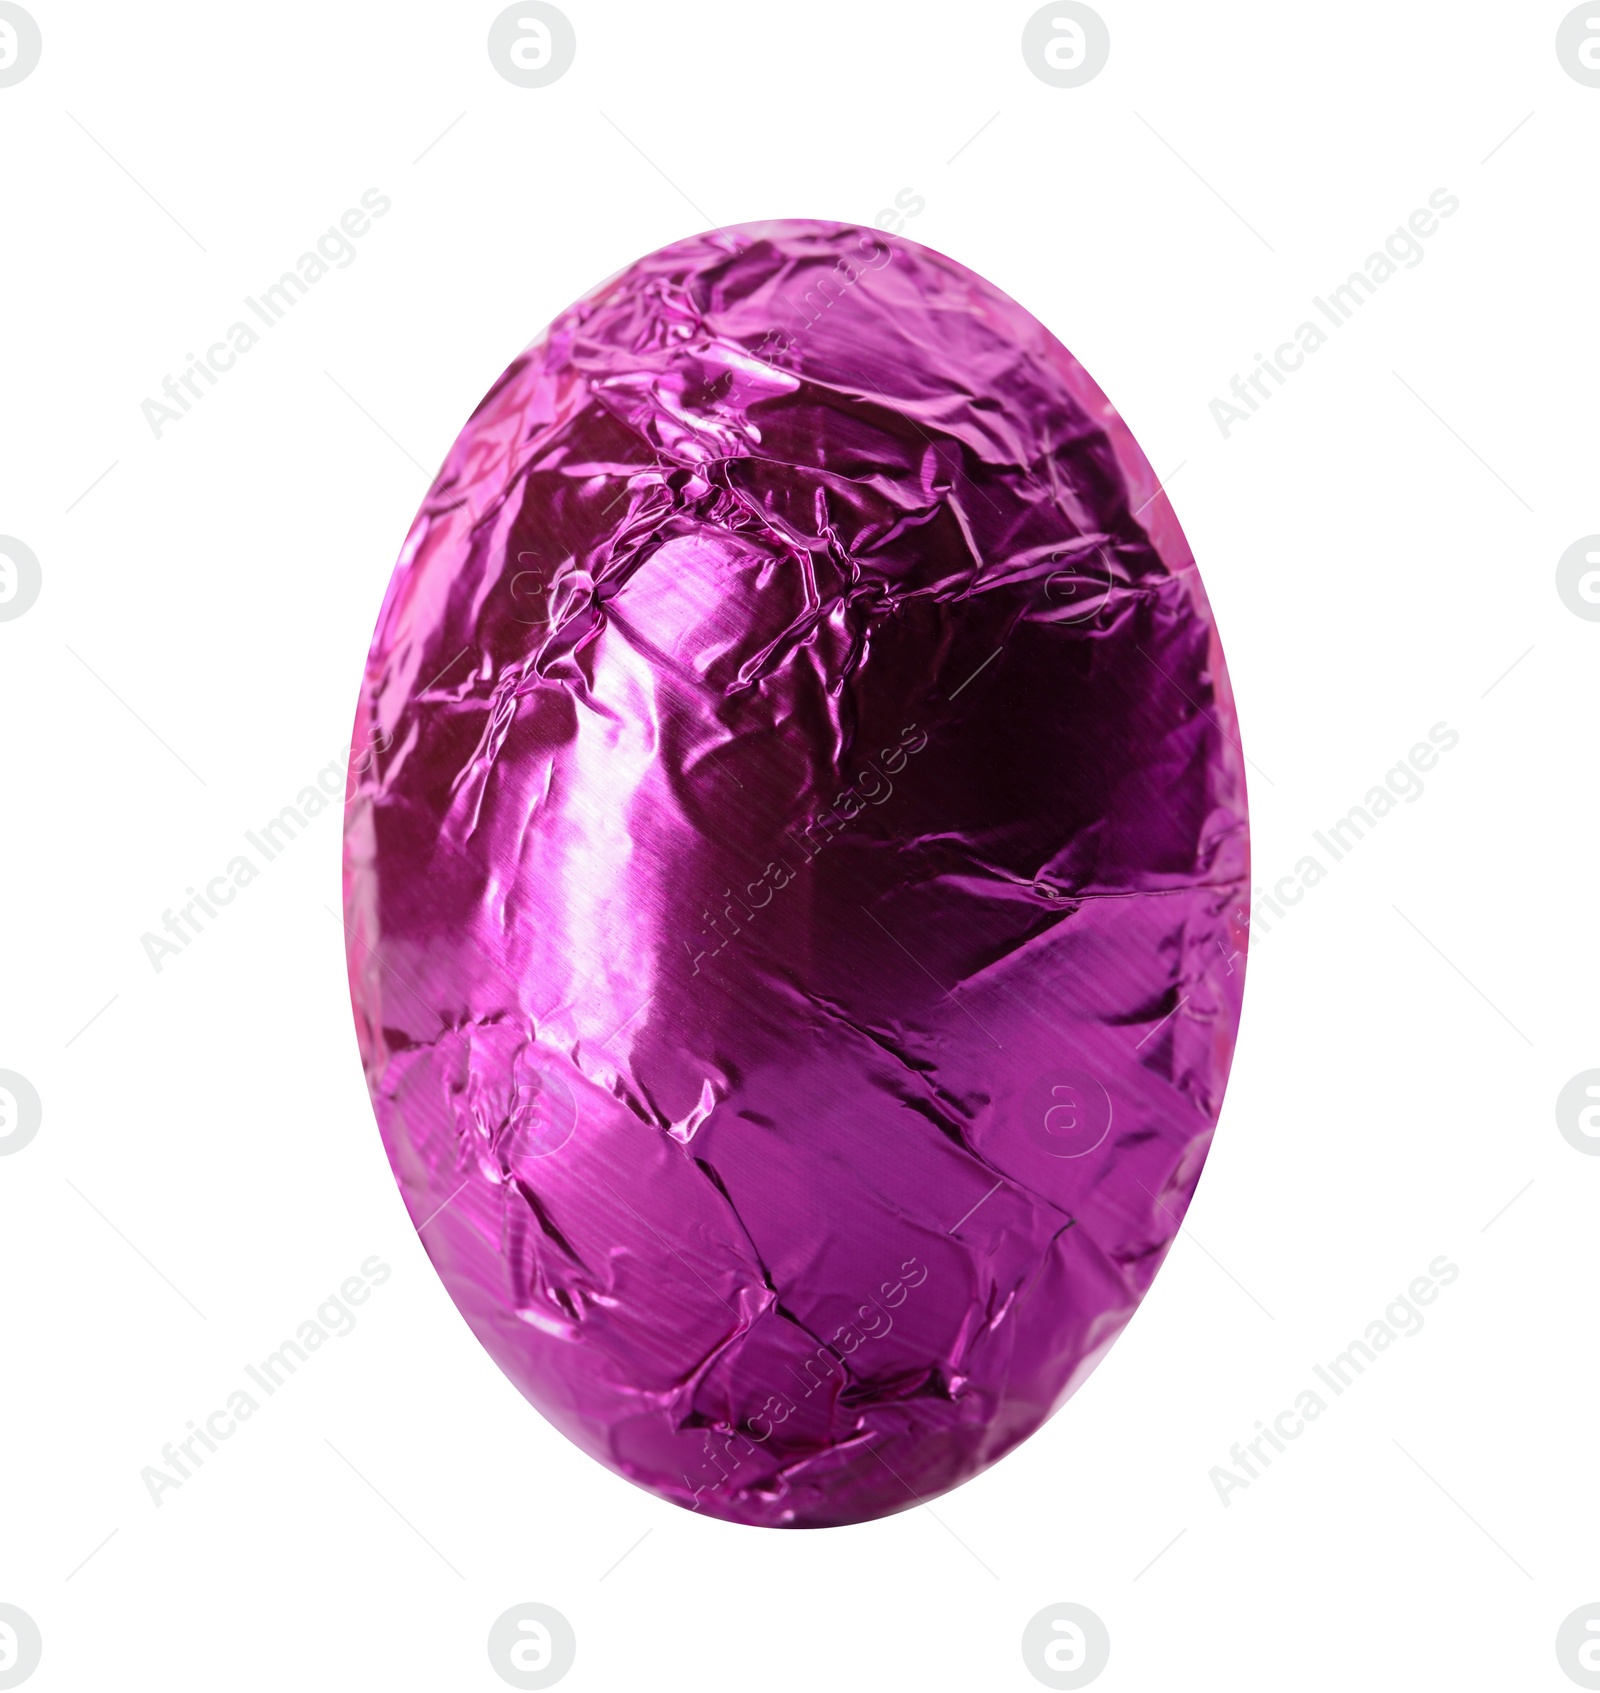 Photo of Chocolate egg wrapped in bright purple foil isolated on white